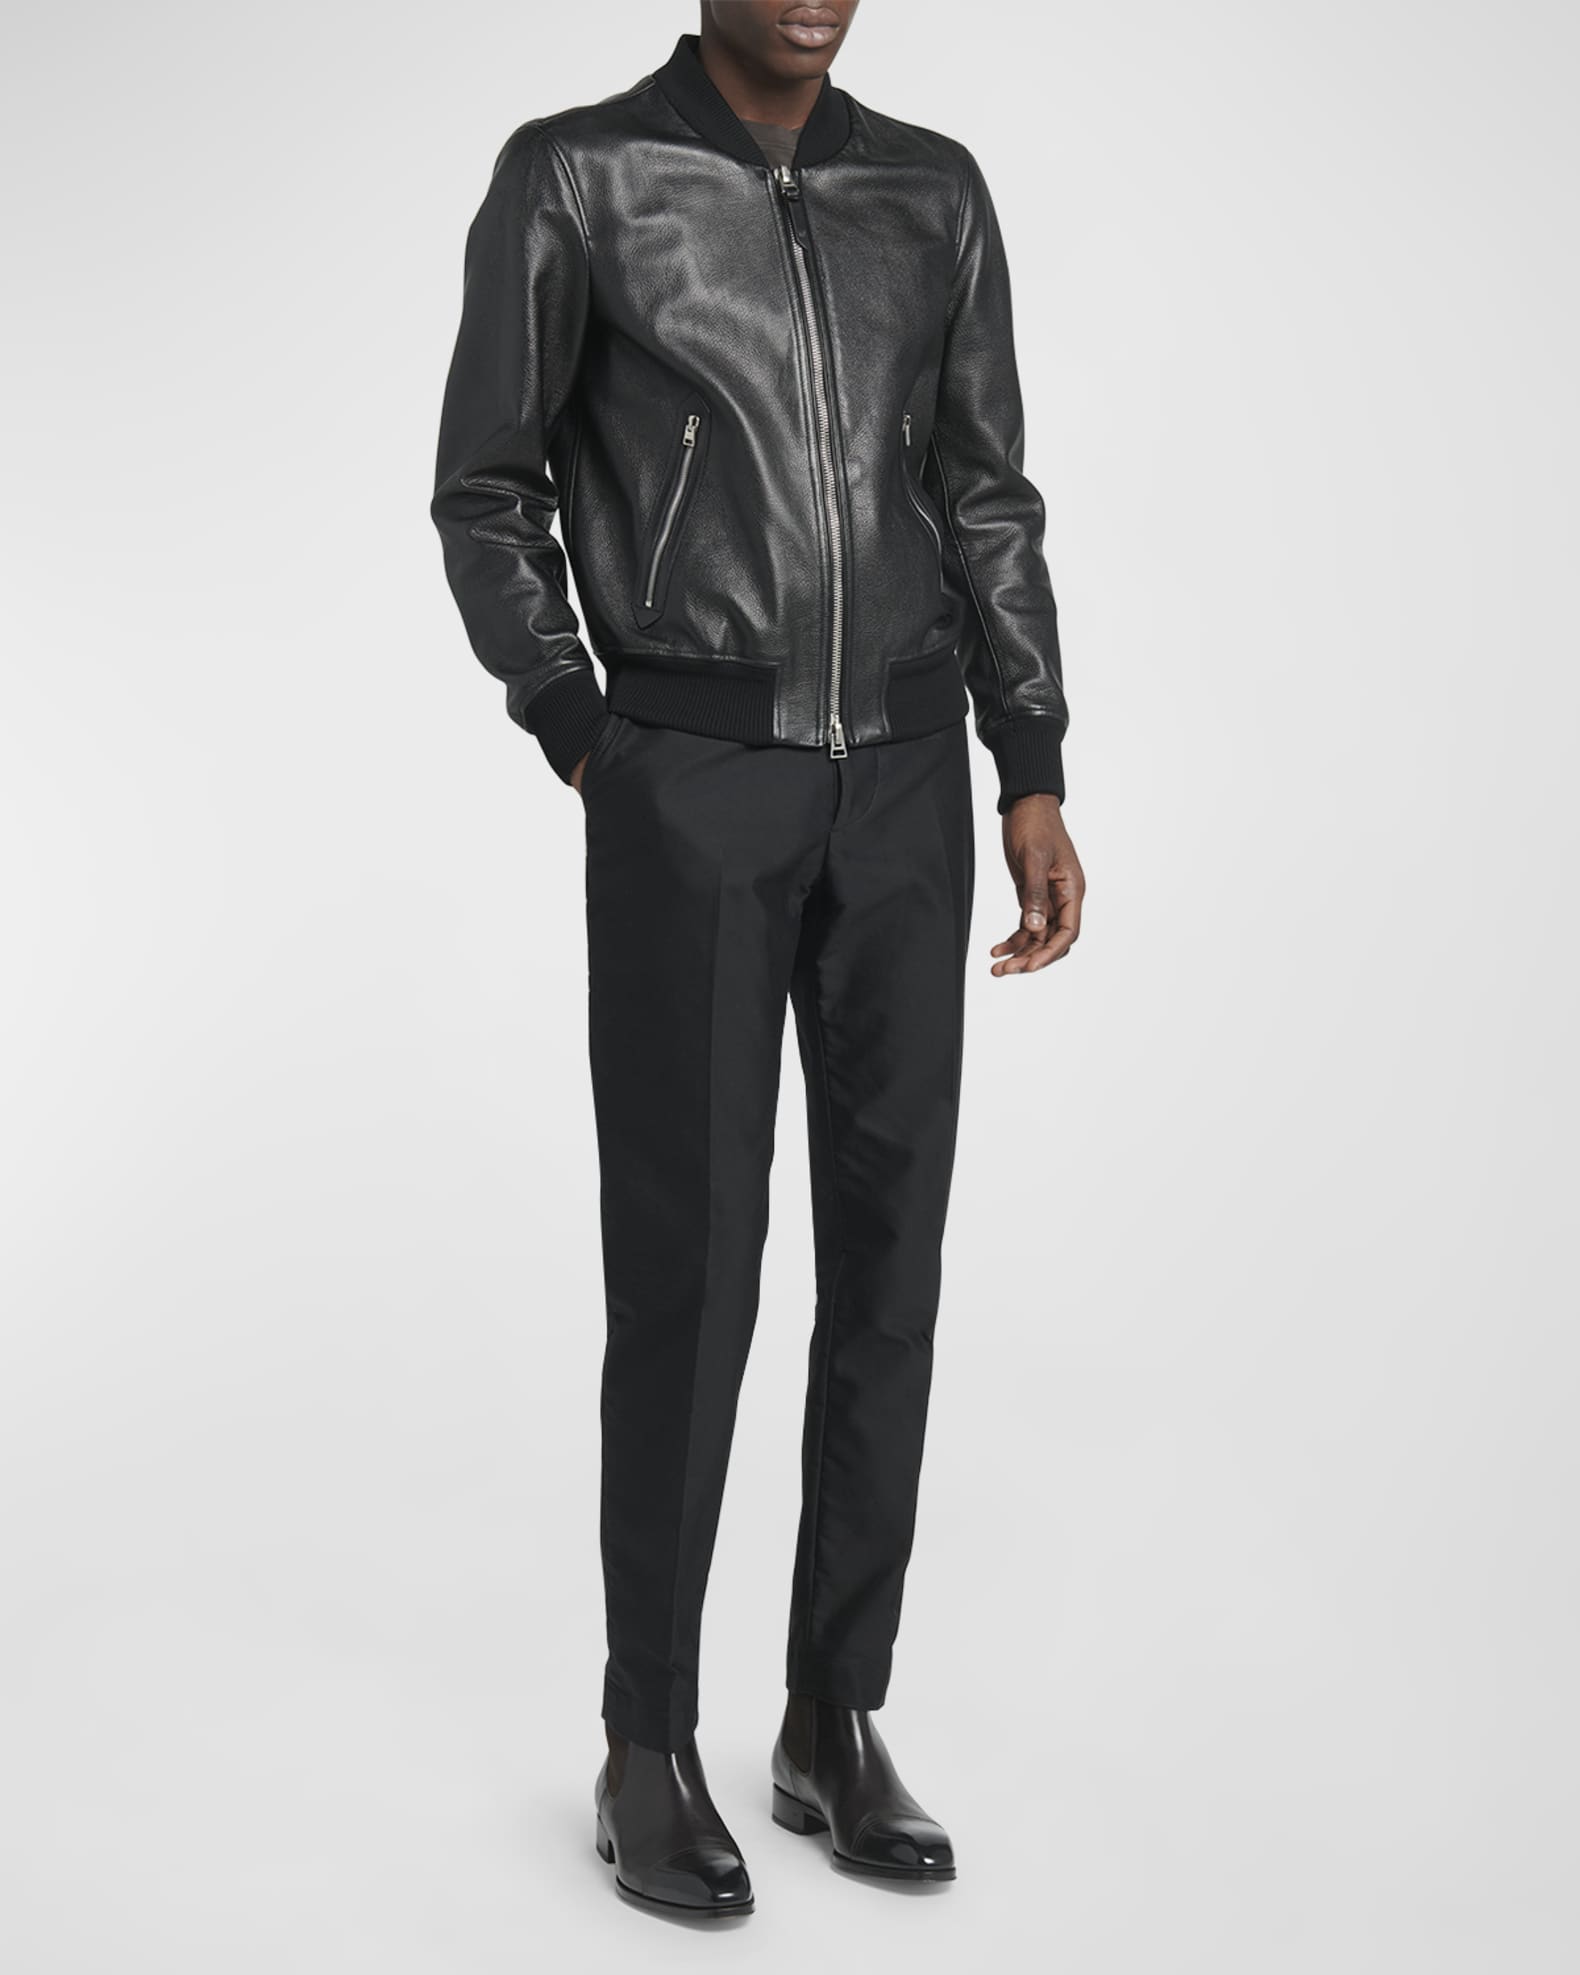 TOM FORD Men's Grained Leather Bomber Jacket | Neiman Marcus